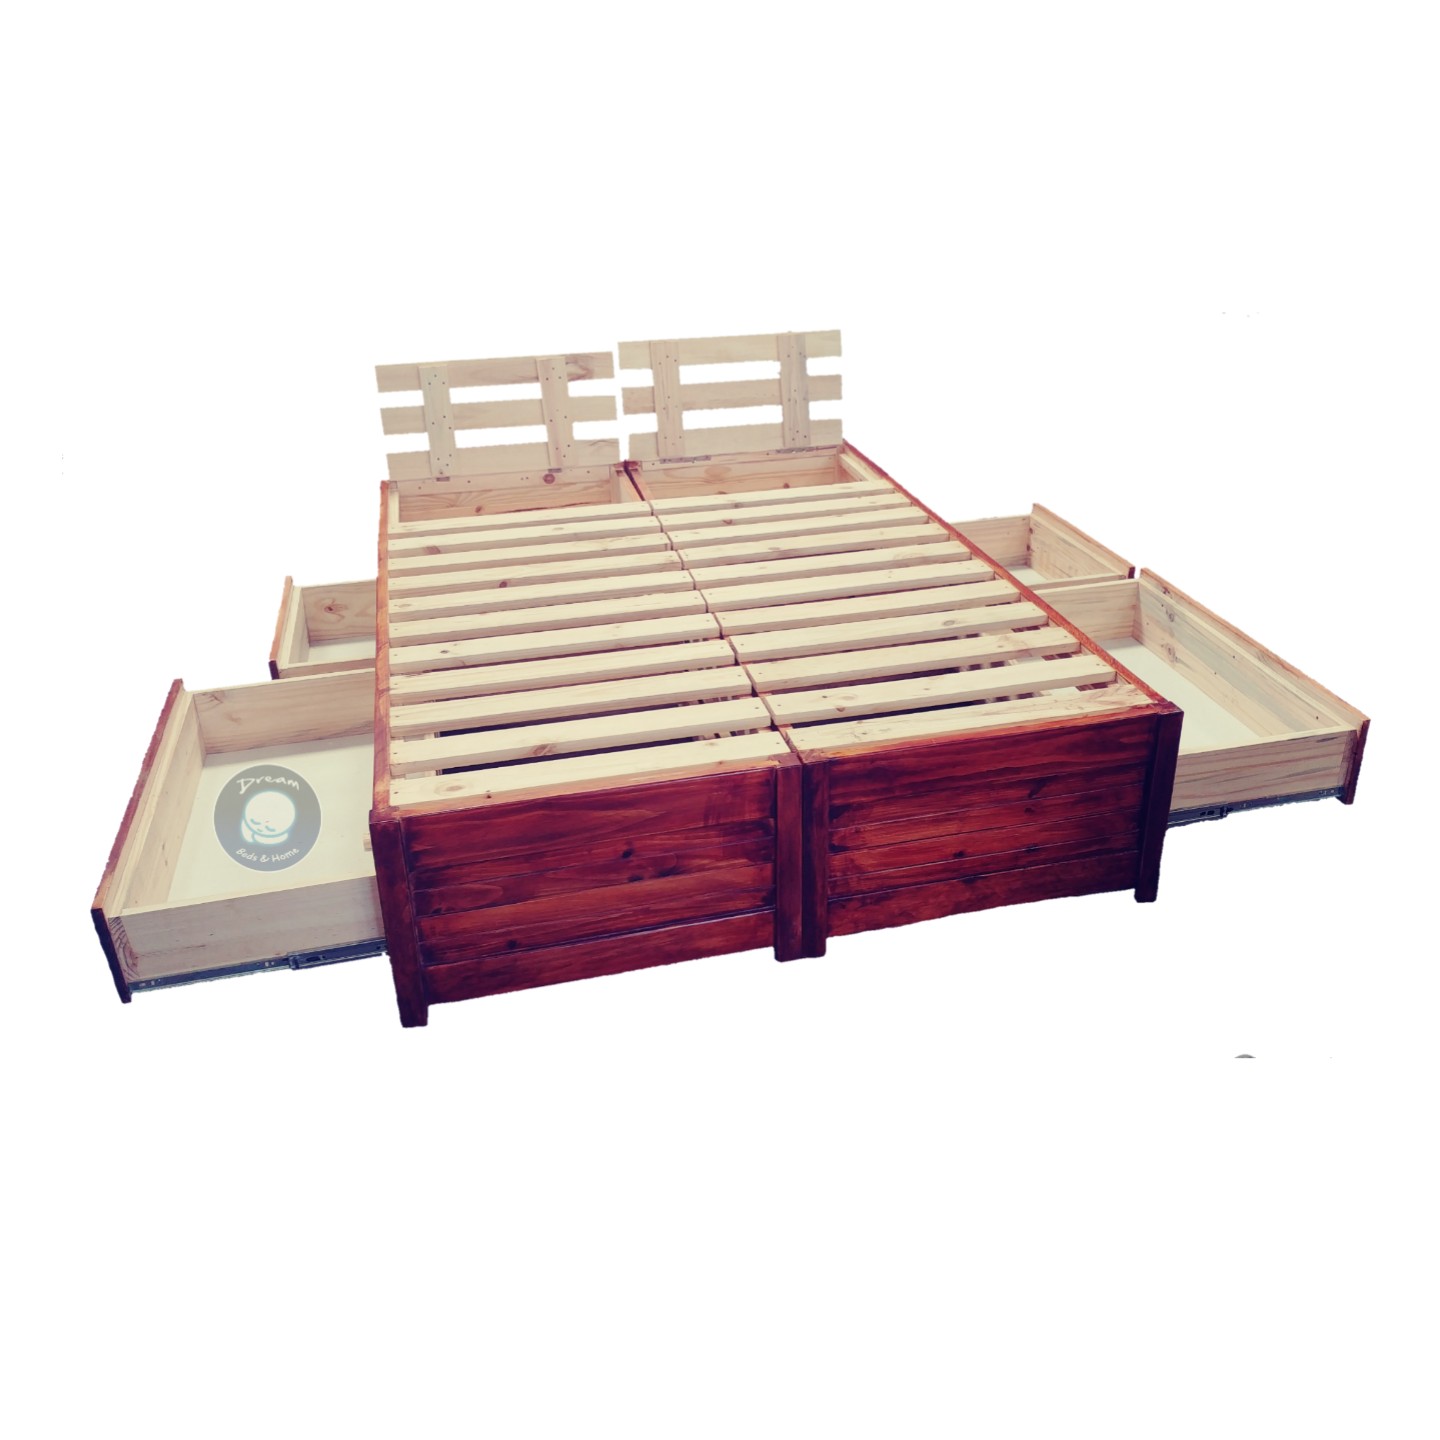 King Storage Bed Base With Drawers, Platform Bed King With Drawers